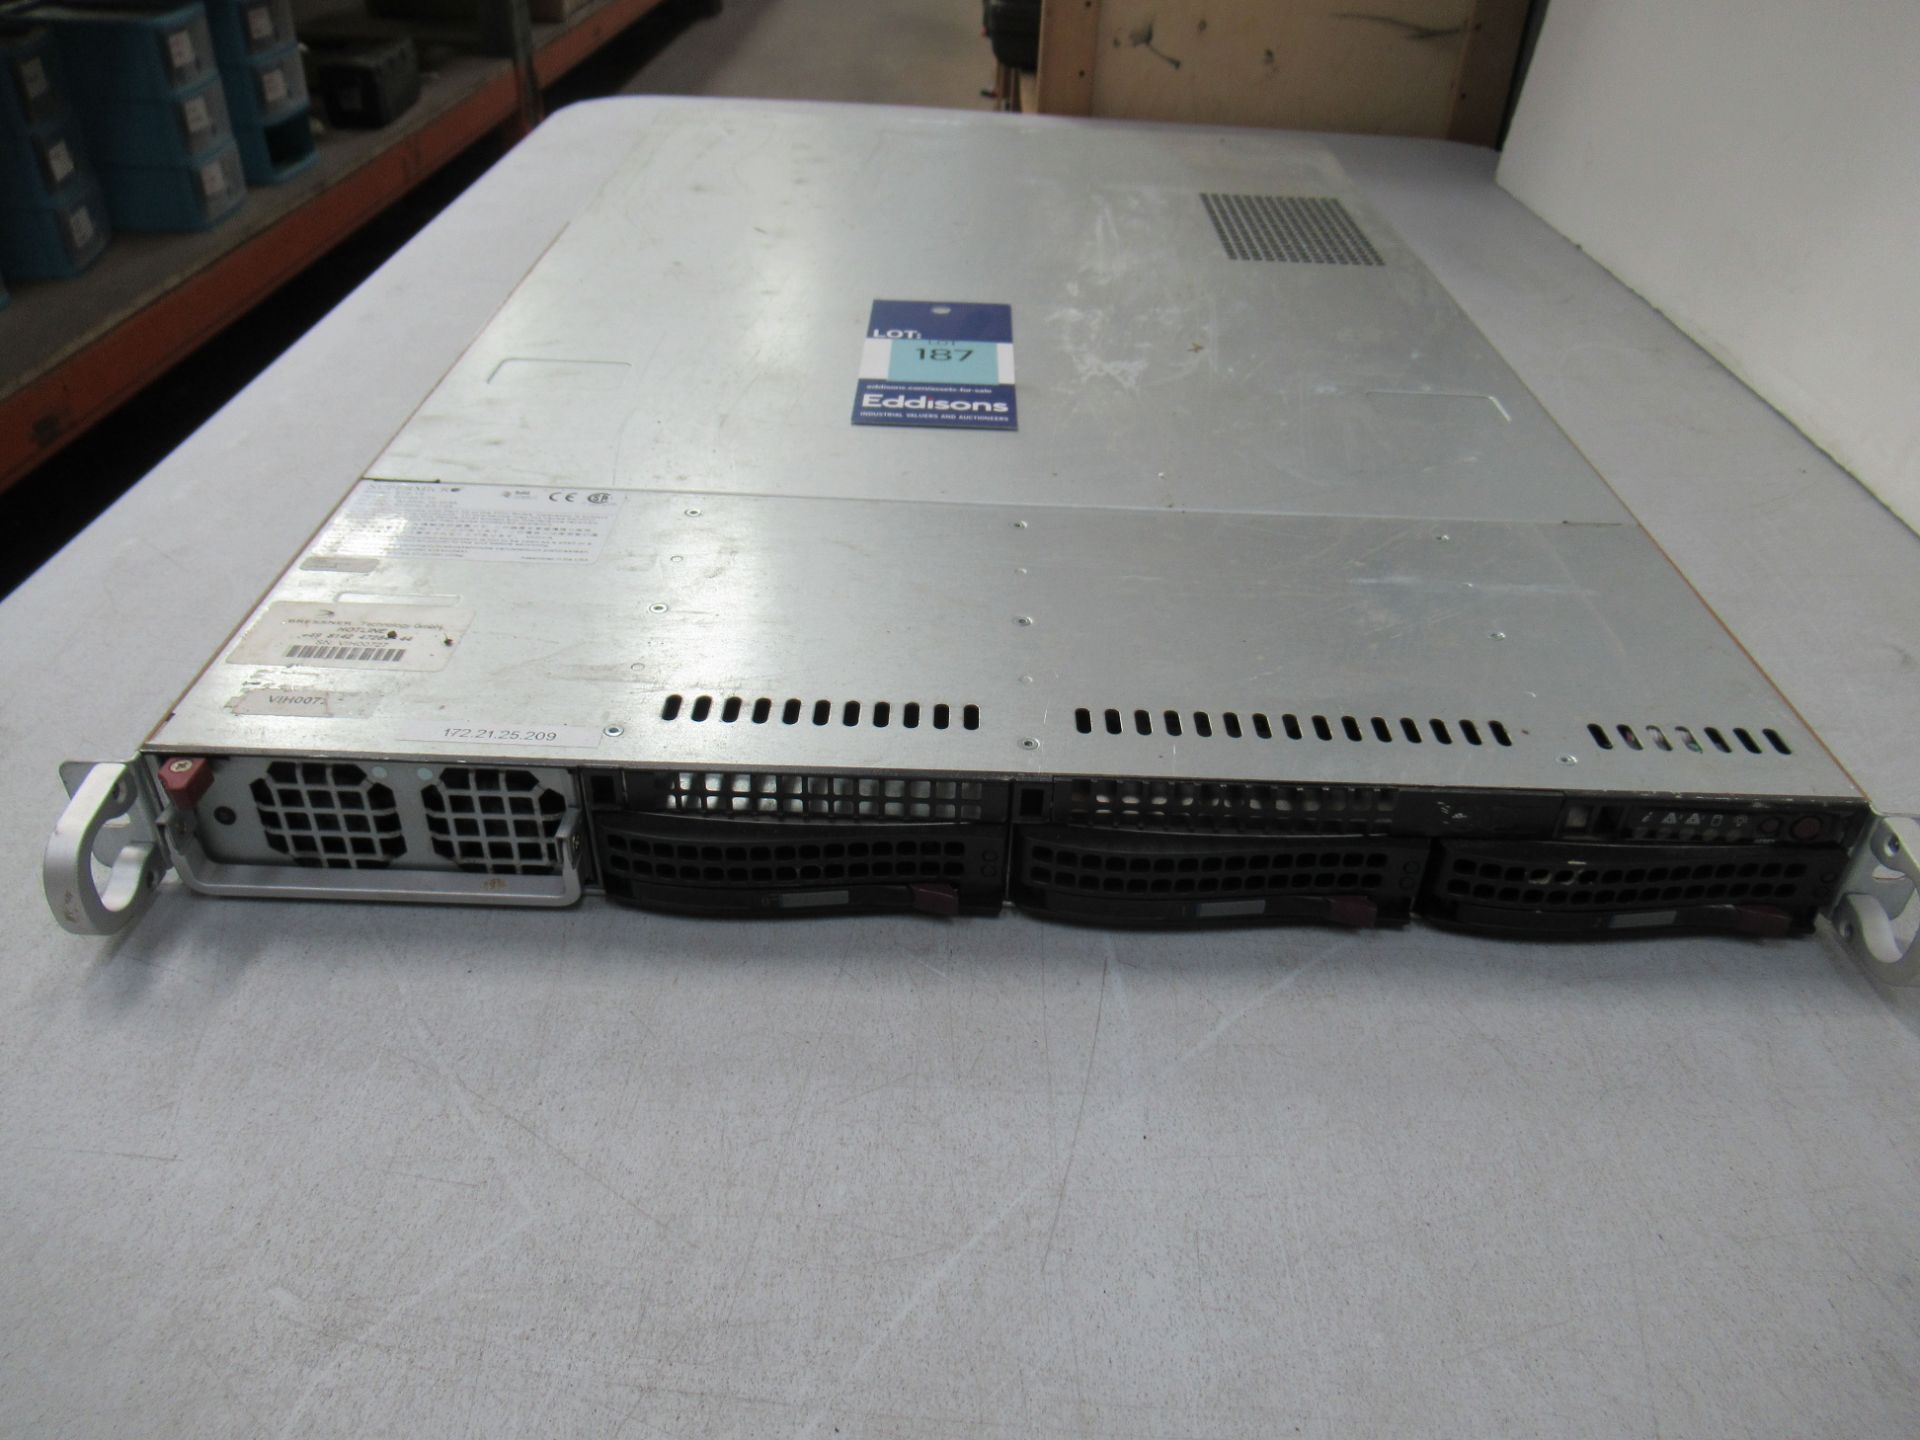 SuperMicro 818-14 Rackmount Chassis